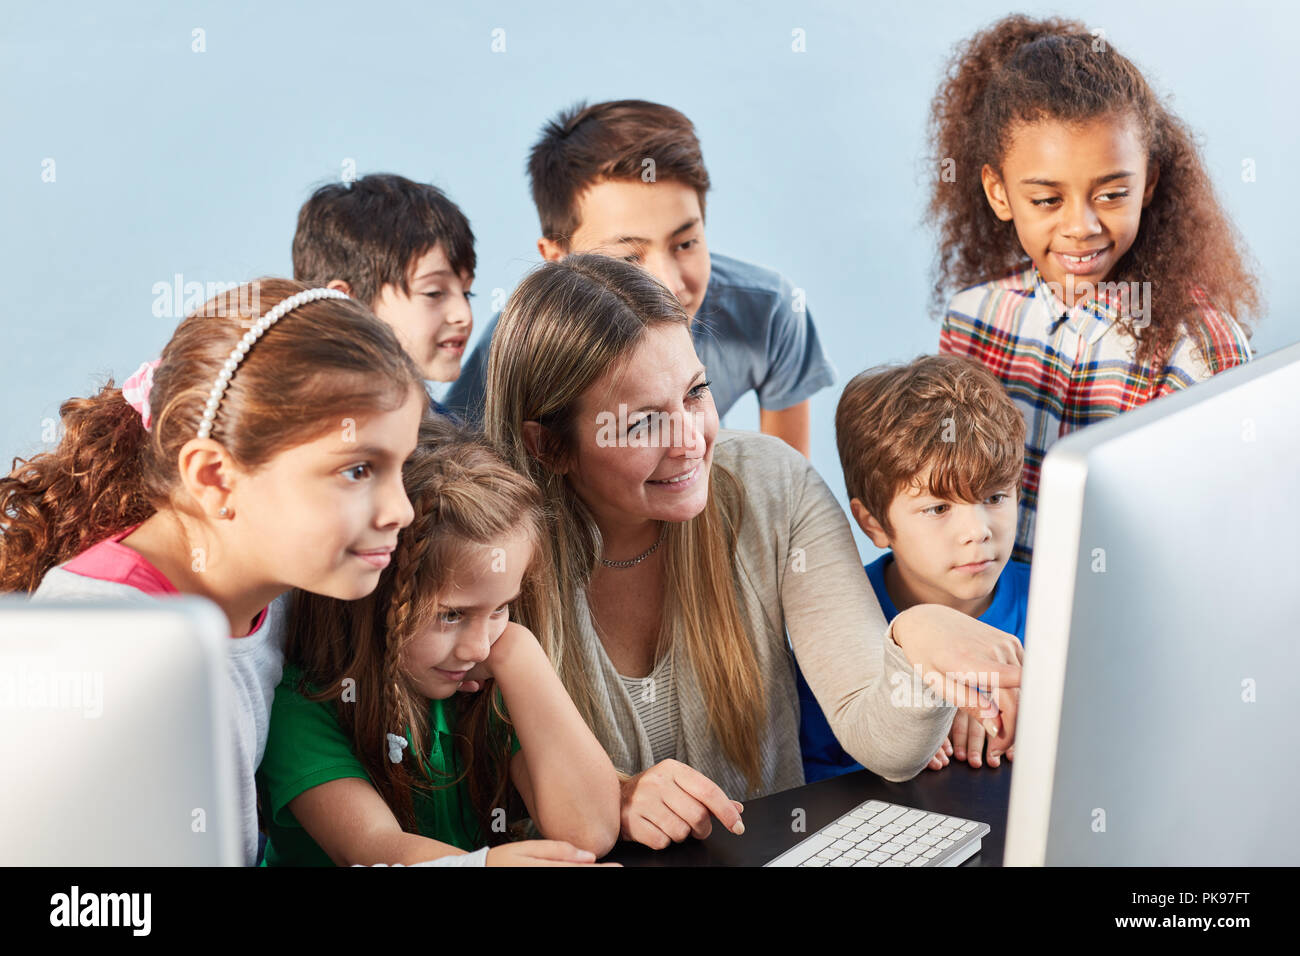 Pupils group learns together on the computer in the internet class Stock Photo